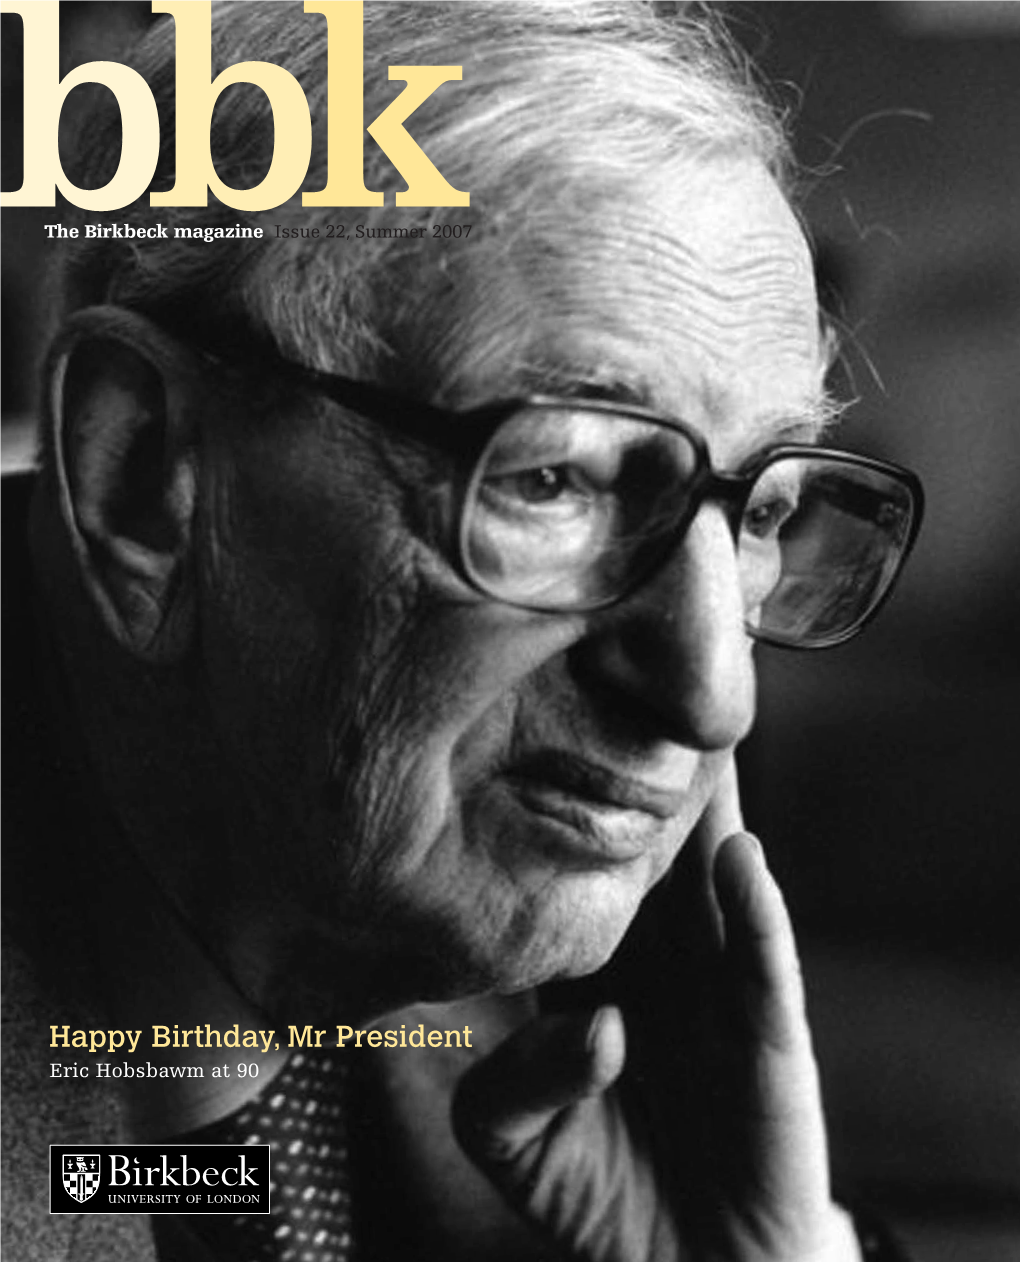 Happy Birthday, Mr President Eric Hobsbawm at 90 Bbk Issue 22 Contents